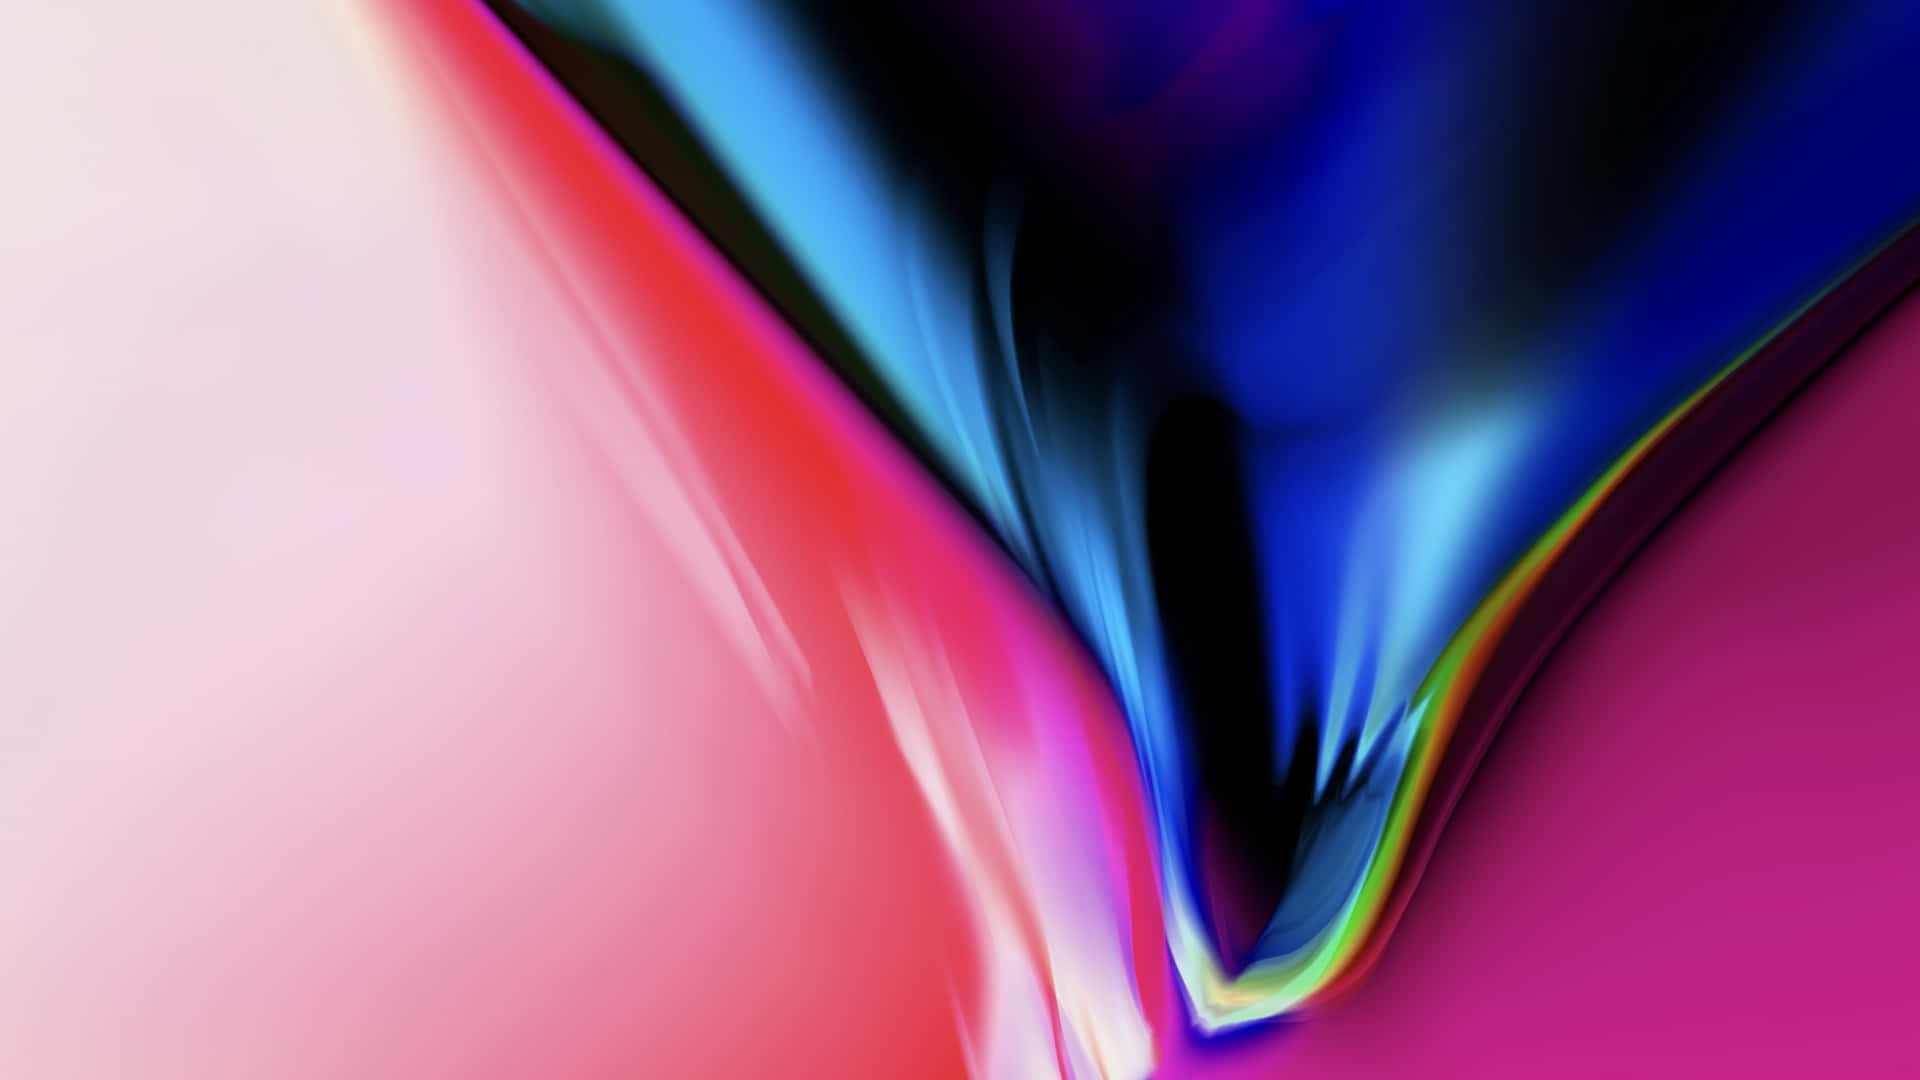 Abstract Color Wave Art Wallpaper